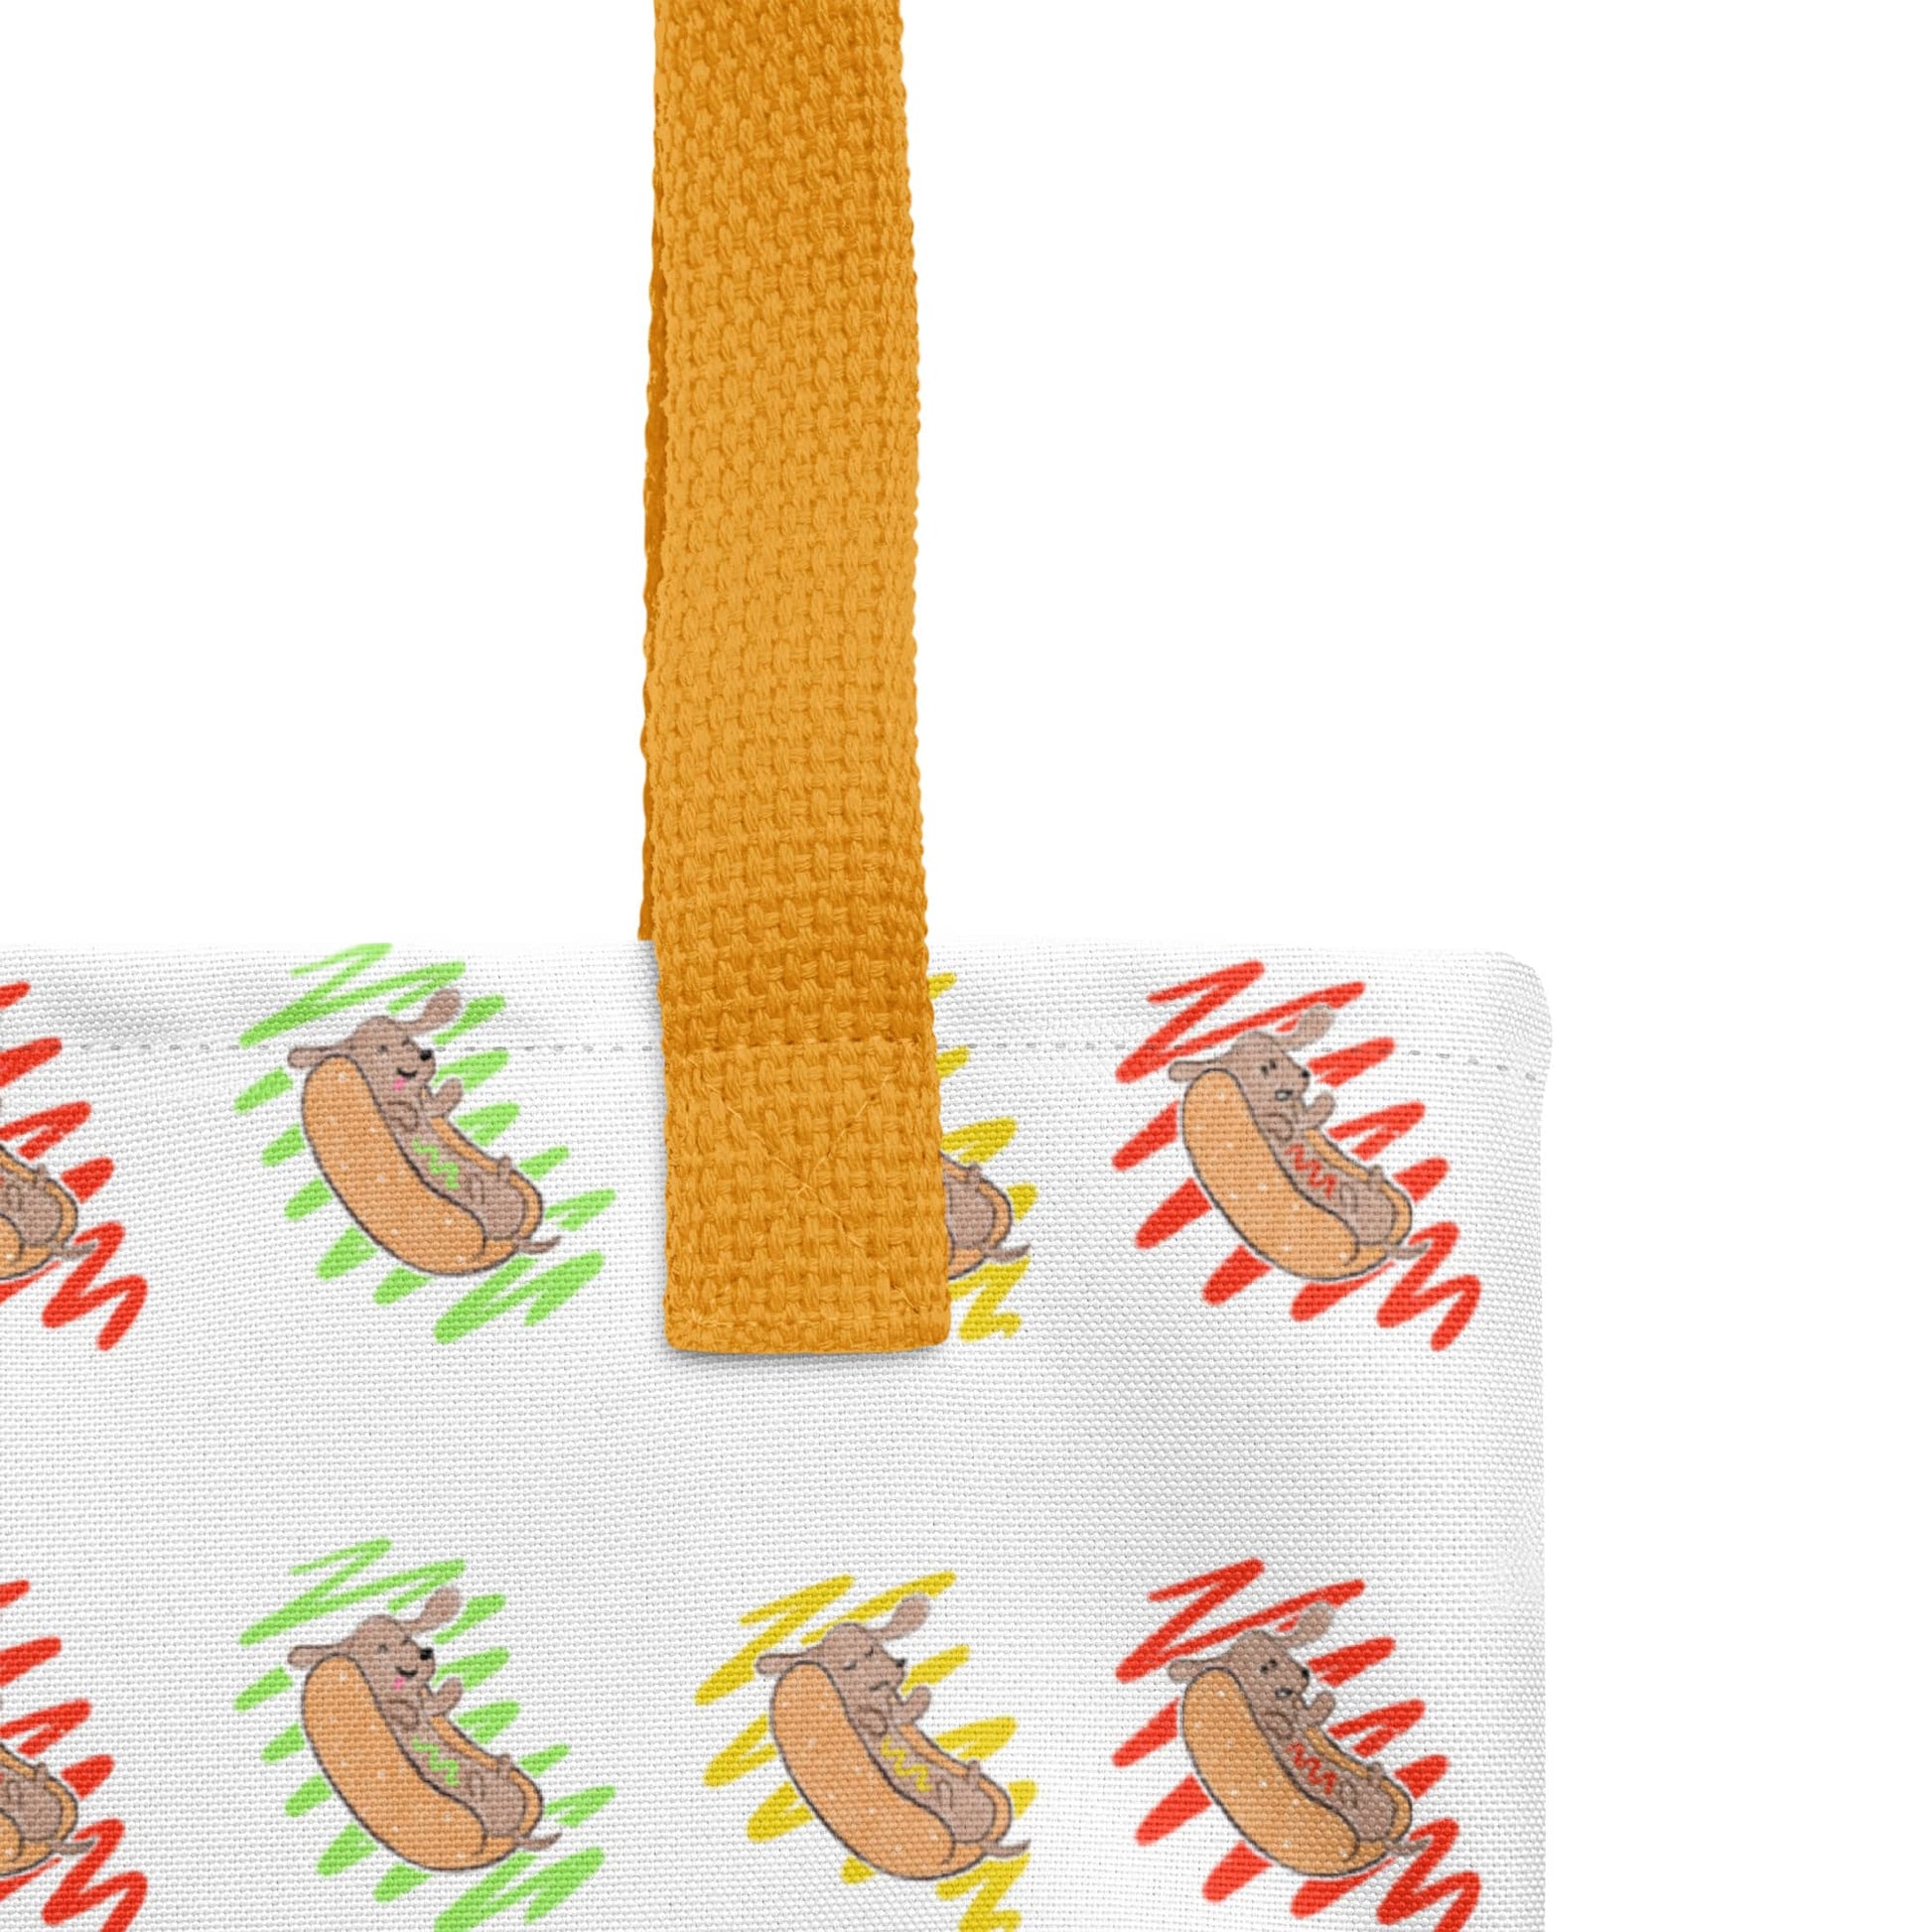 Shop Hot Dog Lover Tote Bag with yellow straps by Boogs & Boop.